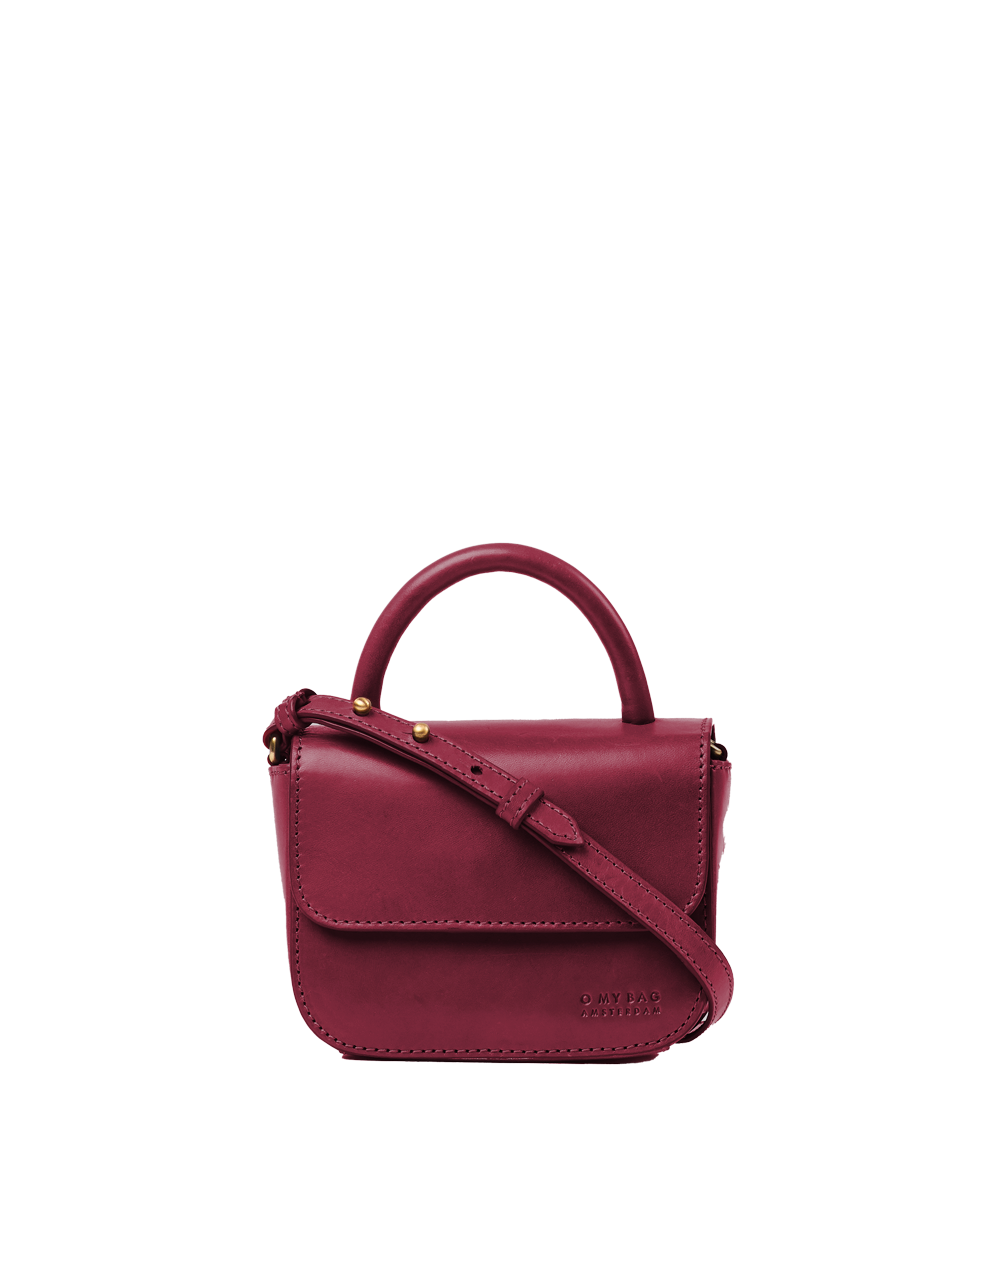 Nano Bag Ruby Classic Leather. Small clutch handbag, party bag. Front product image.